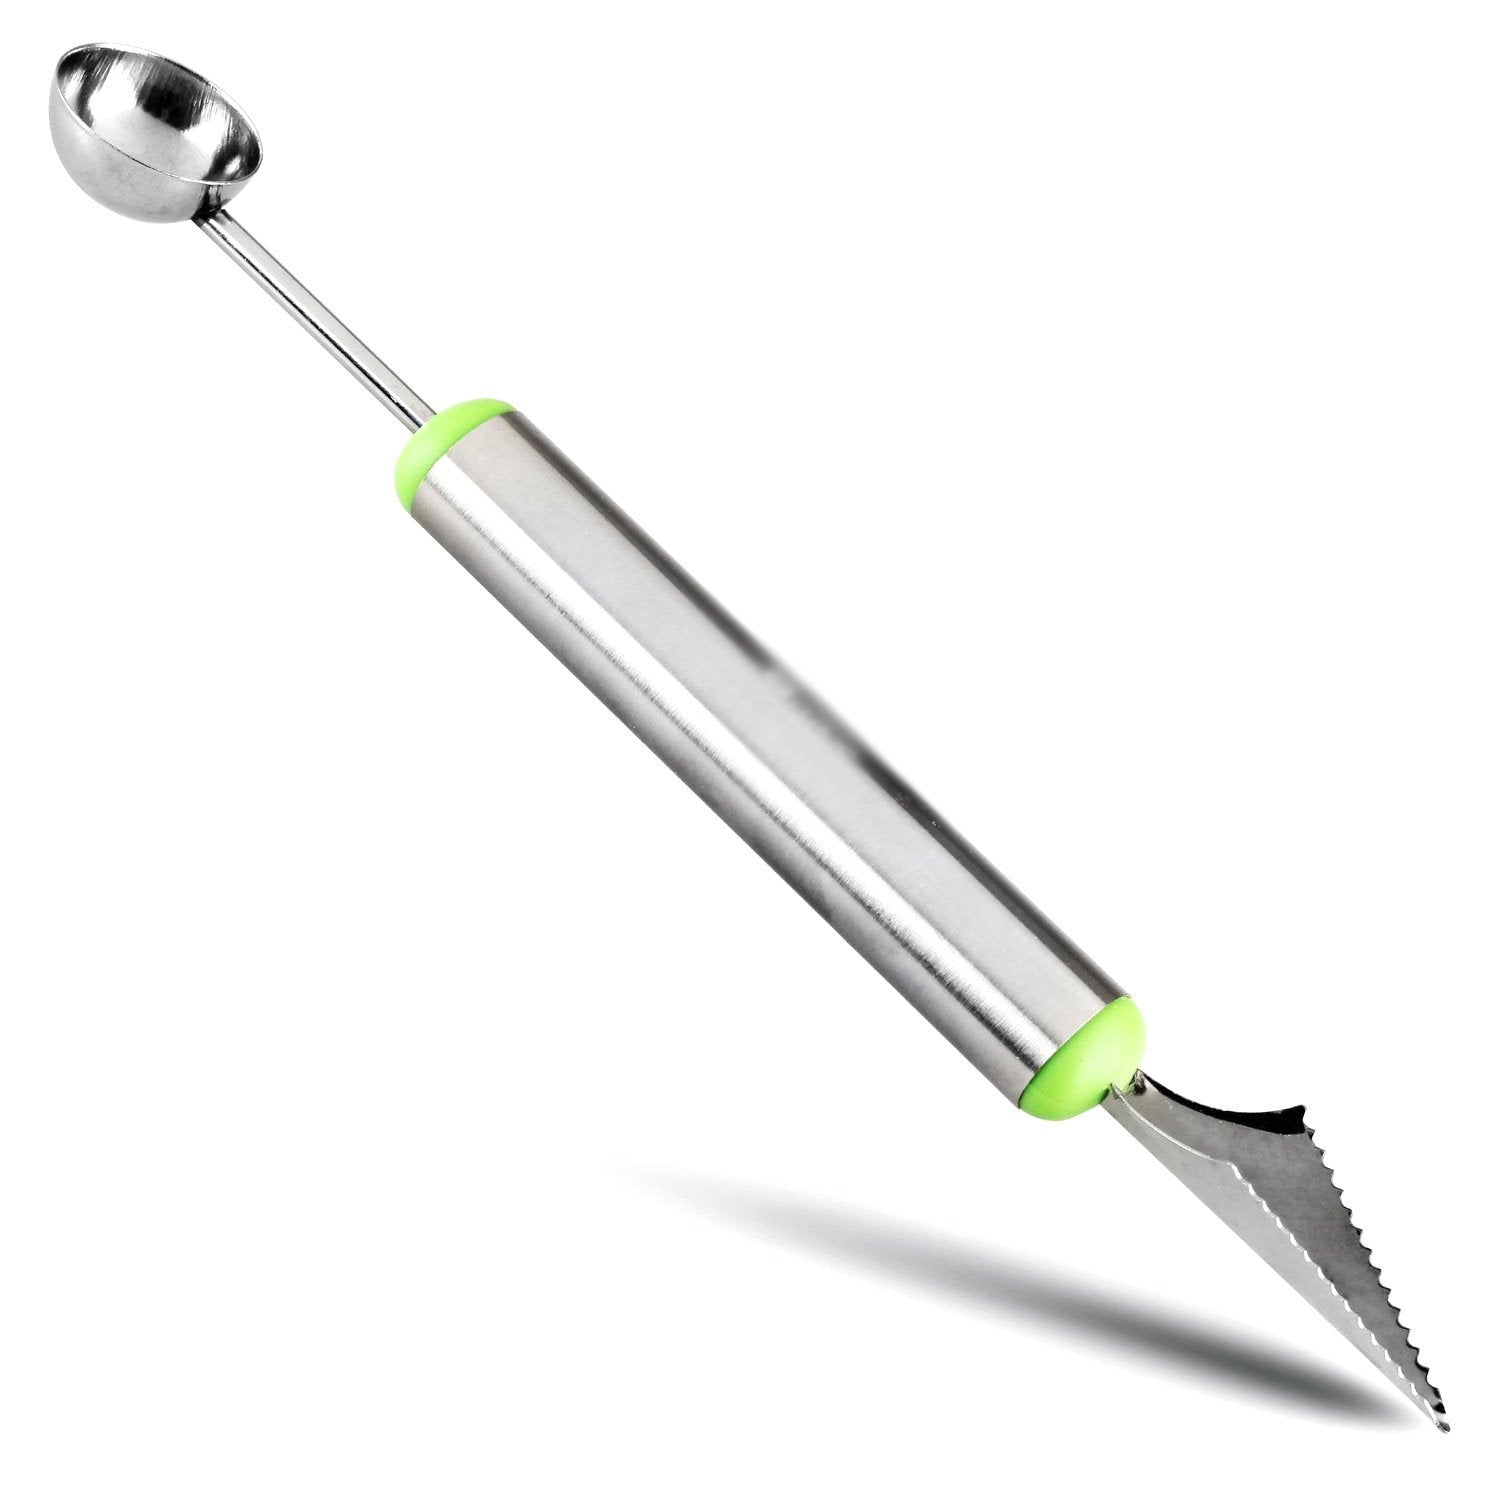 Kitchen - 2-In-1 Stainless Steel Melon Ball Scooper & Carving Knife